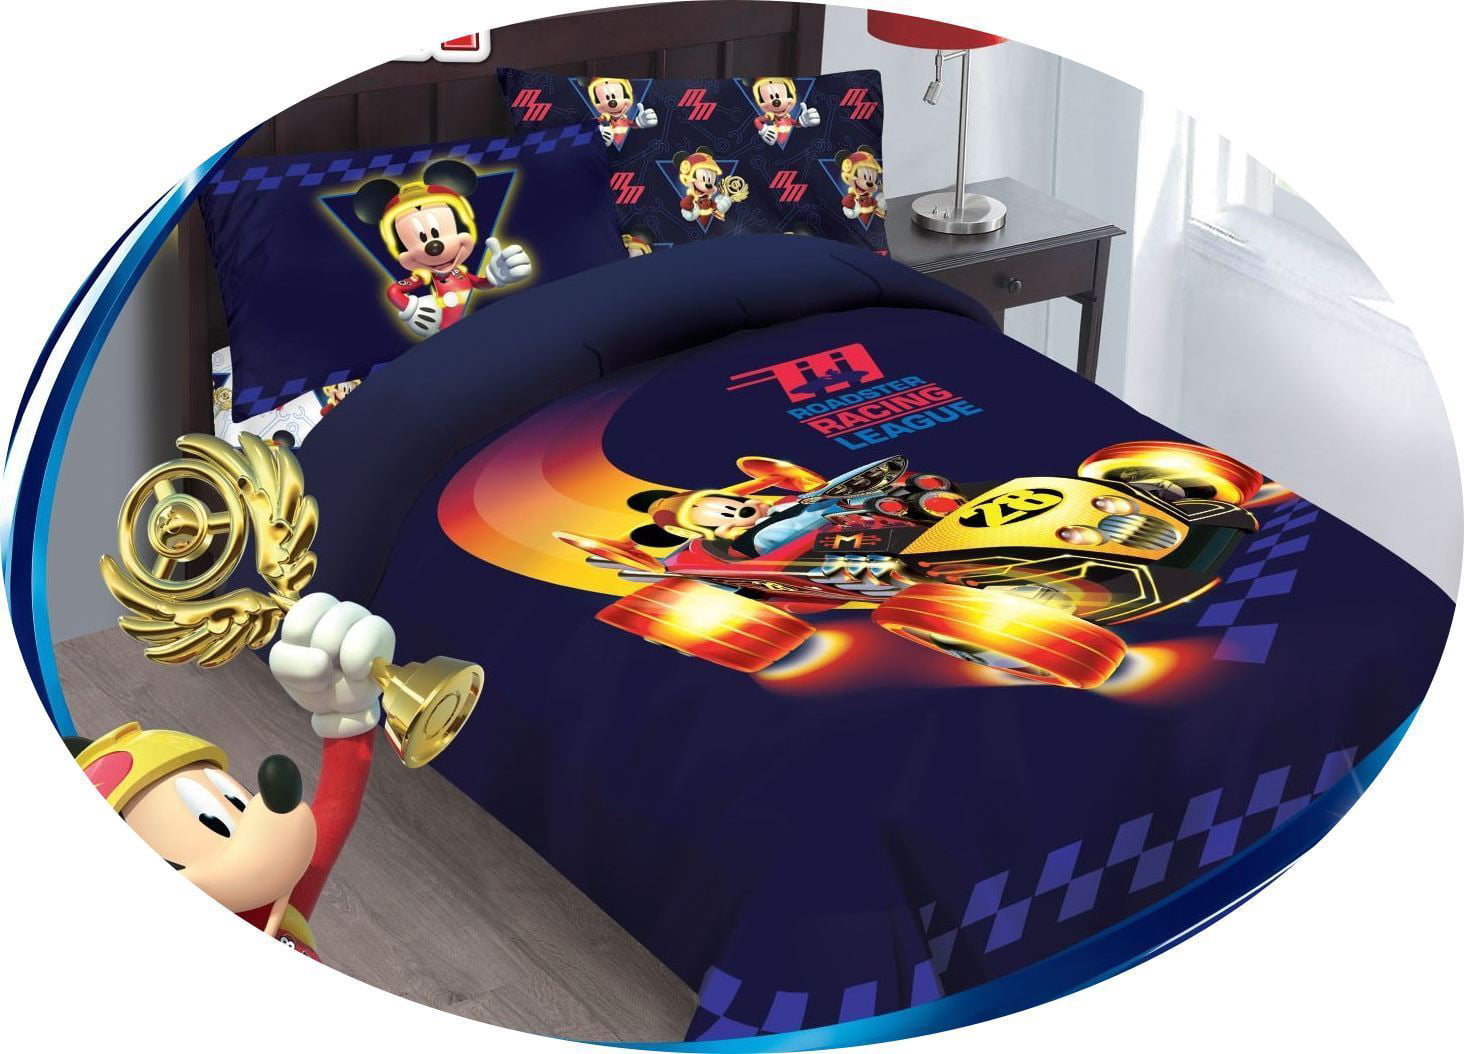 MICKEY MOUSE RACING BED SOFT COMFORTER SET DISNEY MOVIE CARTOONS COLLECTION 